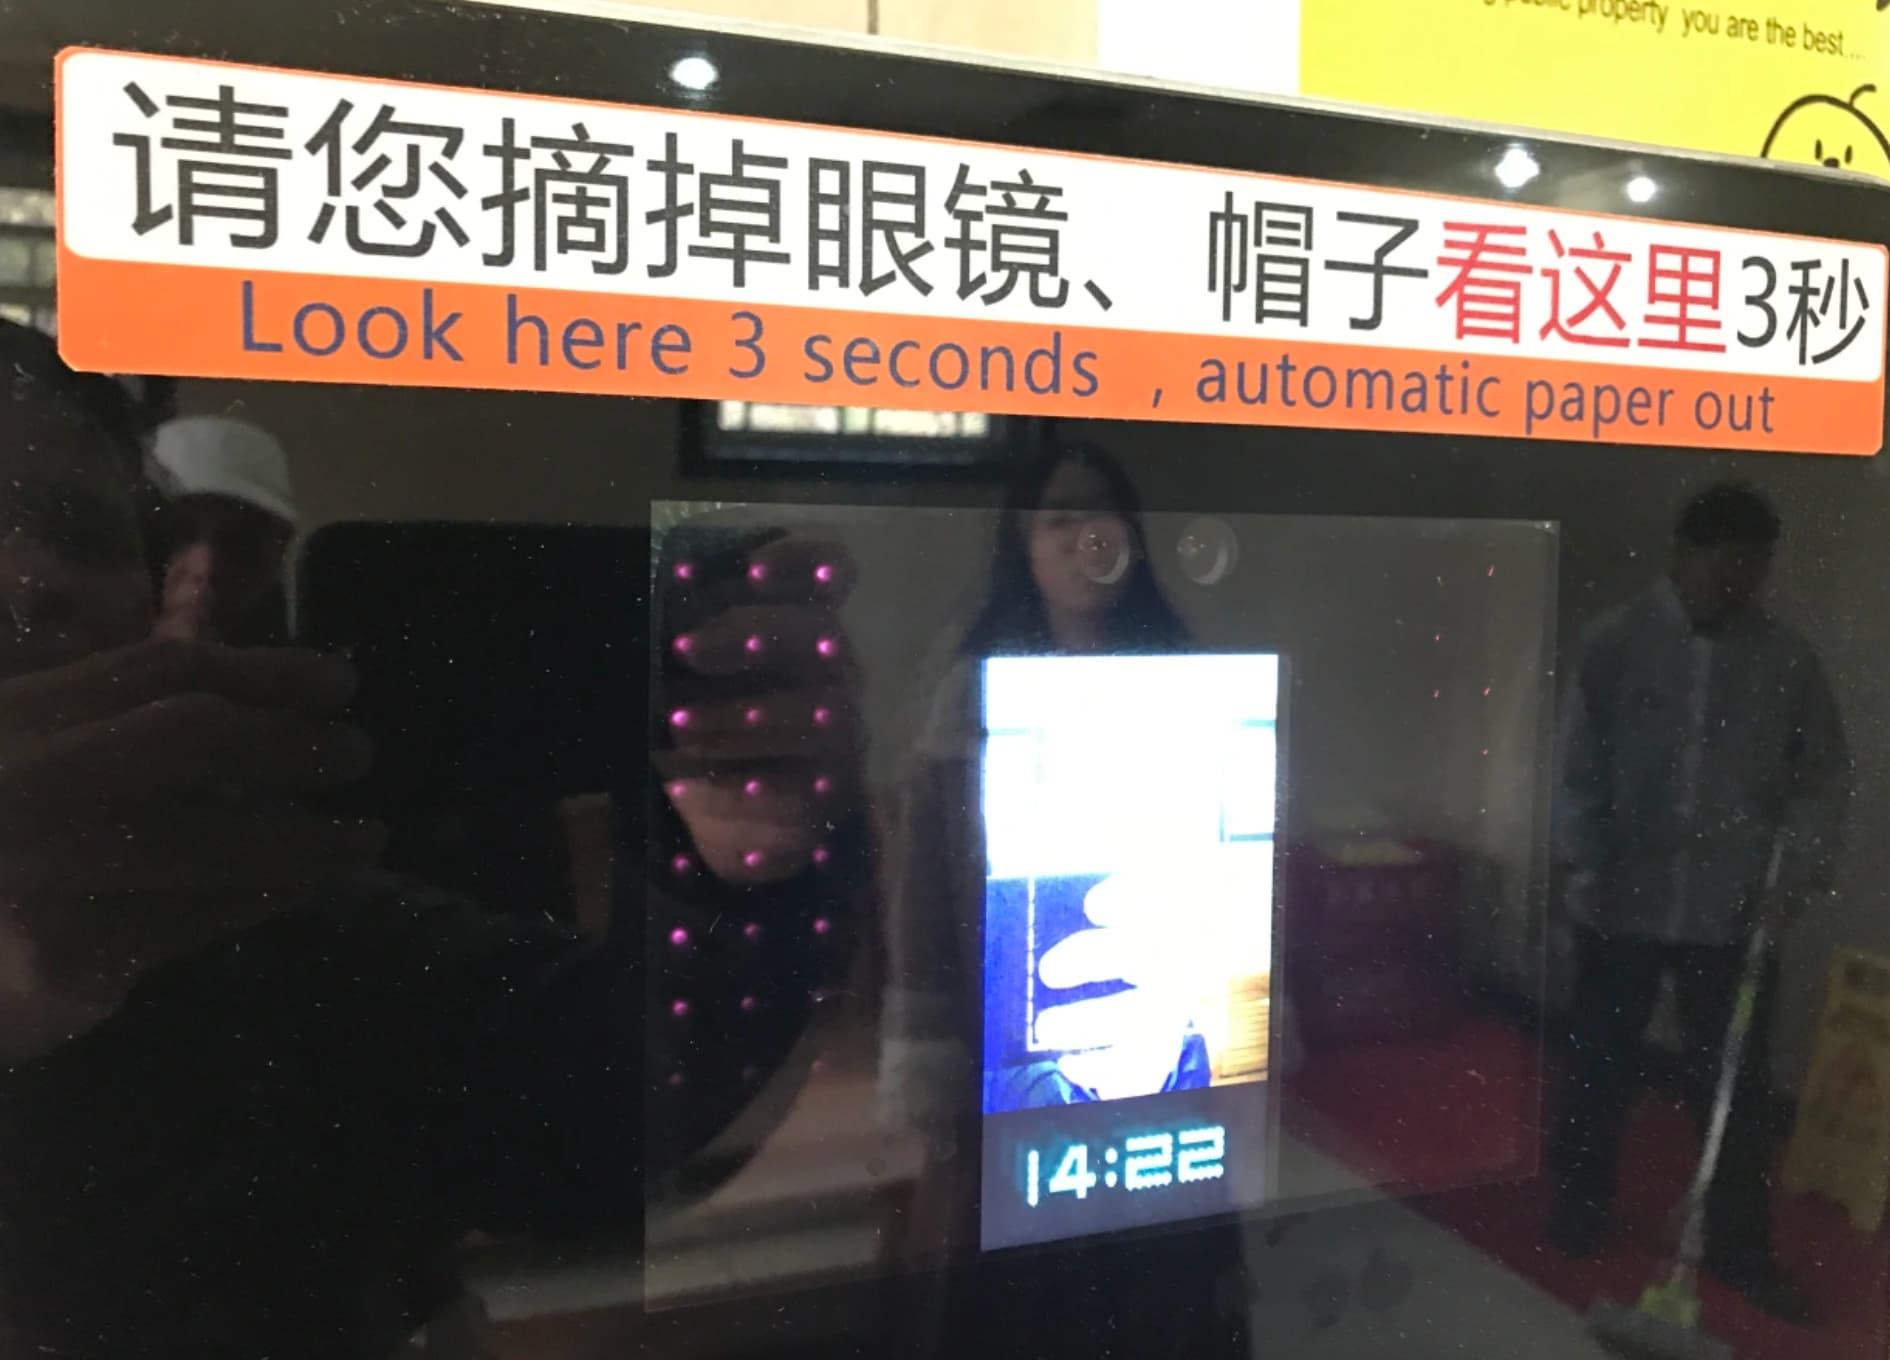 electronic signage - you are the best.... 3 Look here 3 seconds, automatic paper out